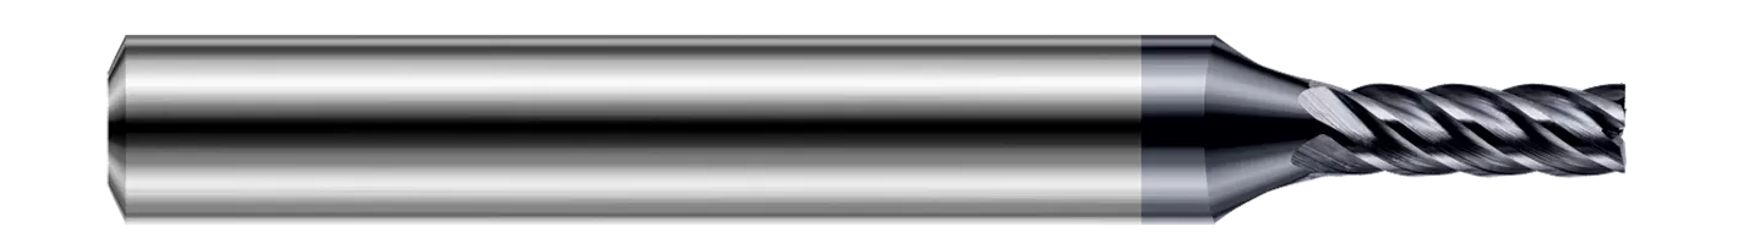 End Mills for Hardened Steels-Square-For Steels Up to 55 Rc